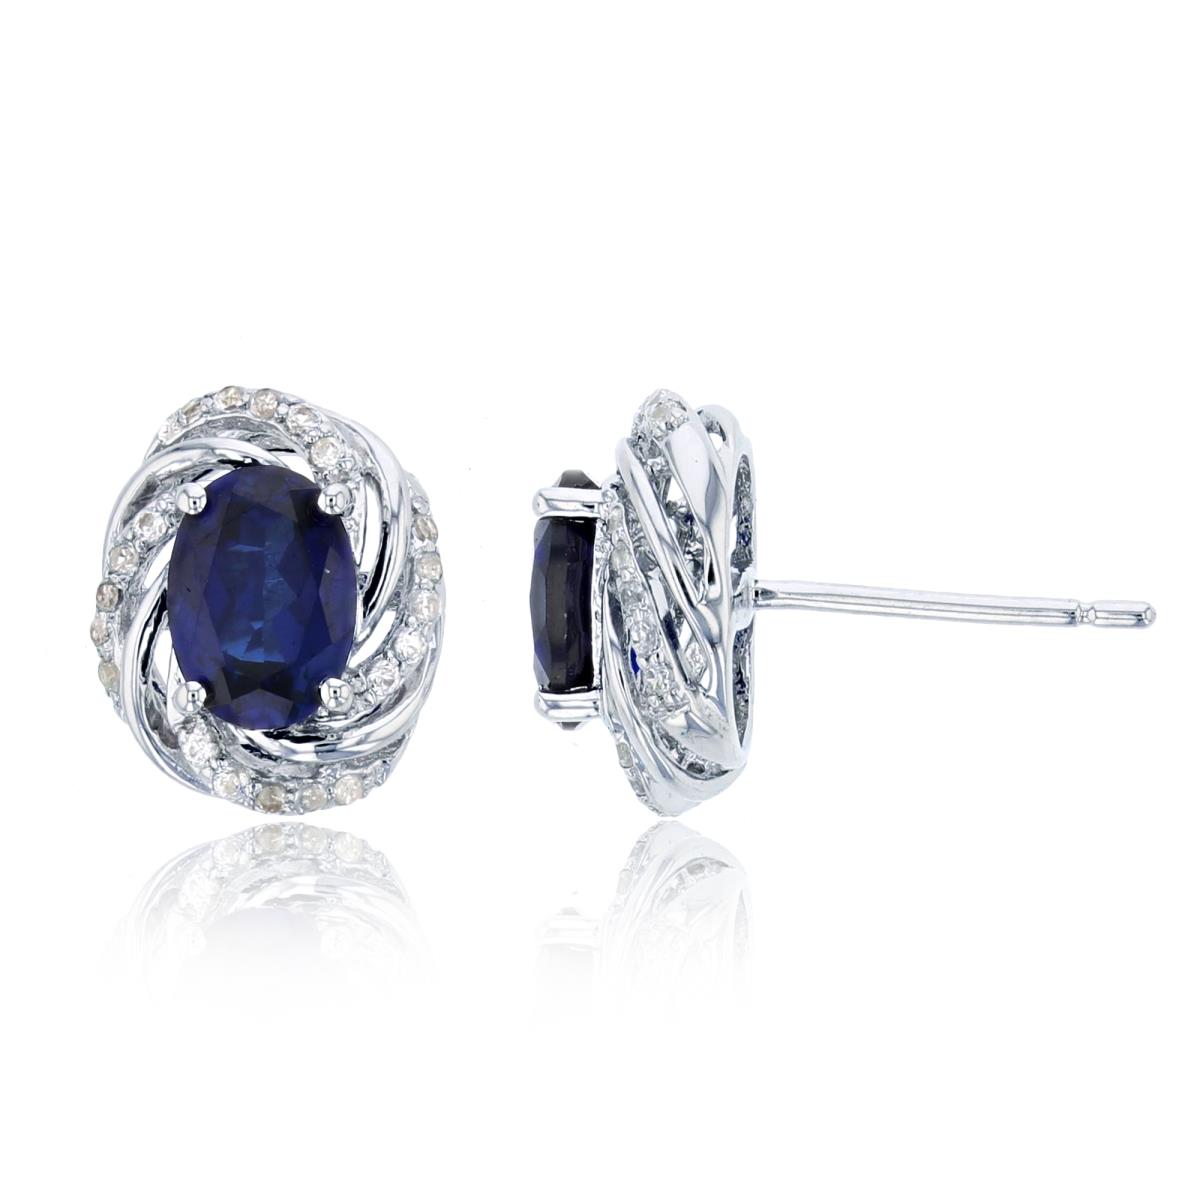 10K White Gold 7x5mm Oval Sapphire & 0.20 CTTW Diamonds Knot Stud Earring with Silicone Back